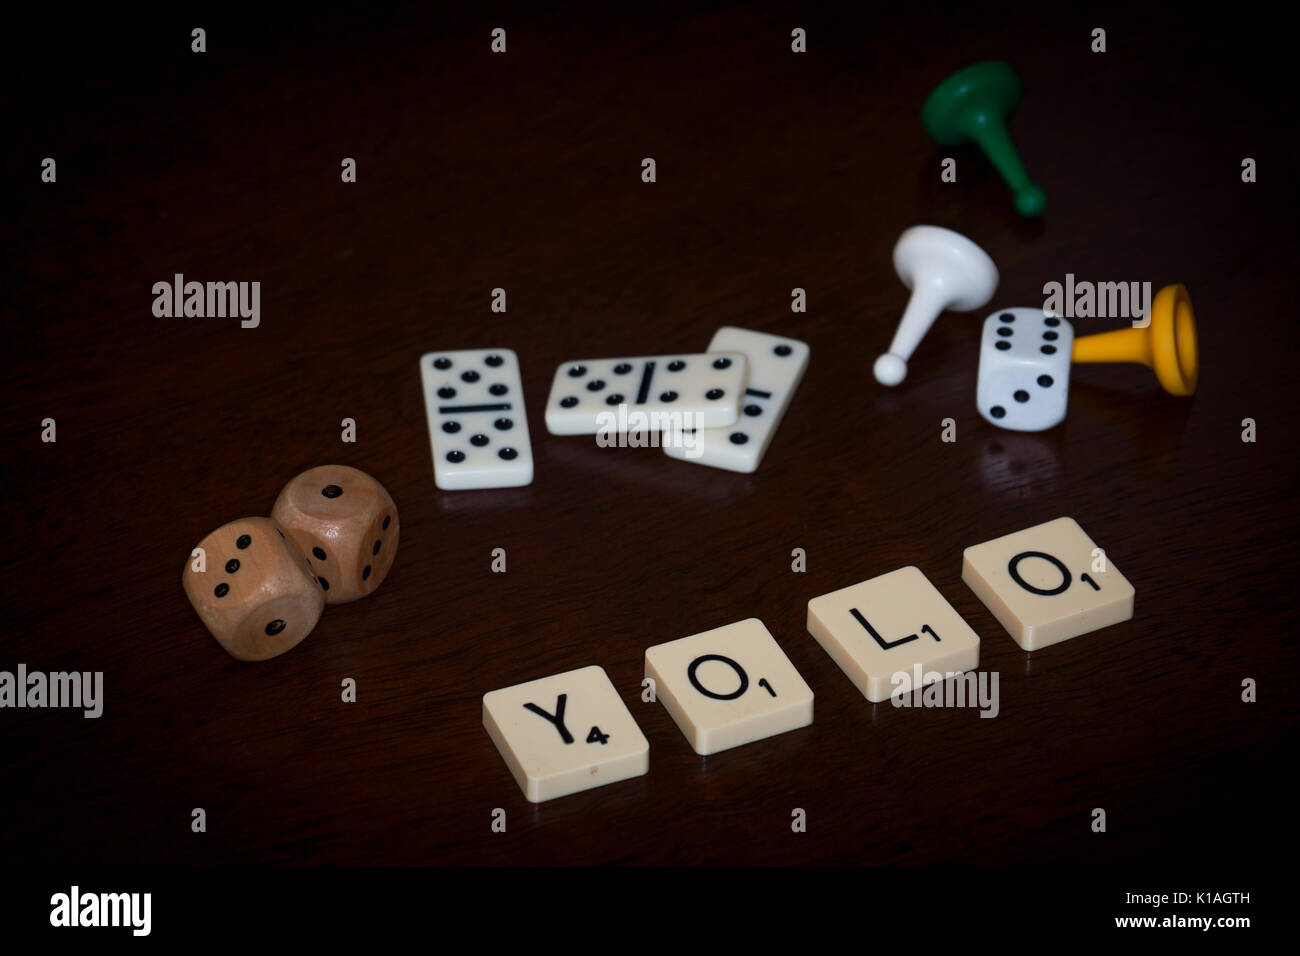 Word tiles spell out 'YOLO' (You only live once), various board gaming paraphernalia is close by. Stock Photo